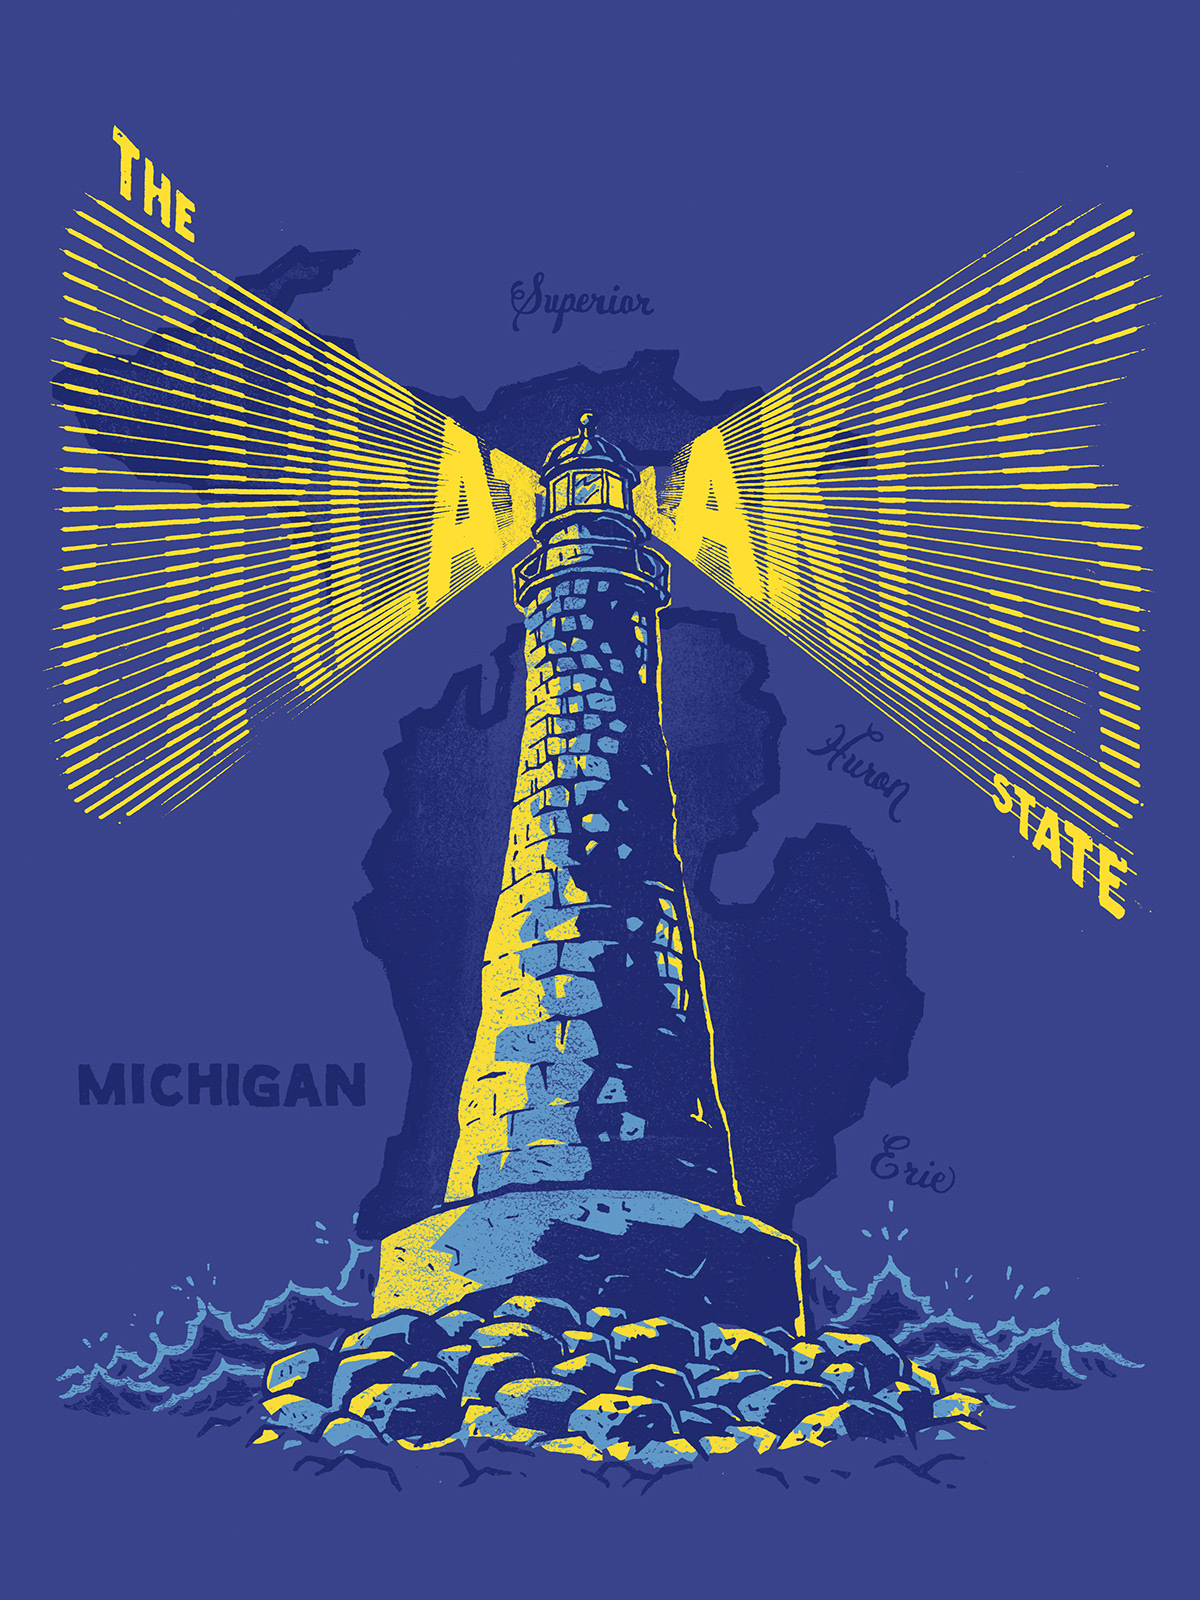 The Great Lakes Michigan illinois Midwest posters ohio state mottos art